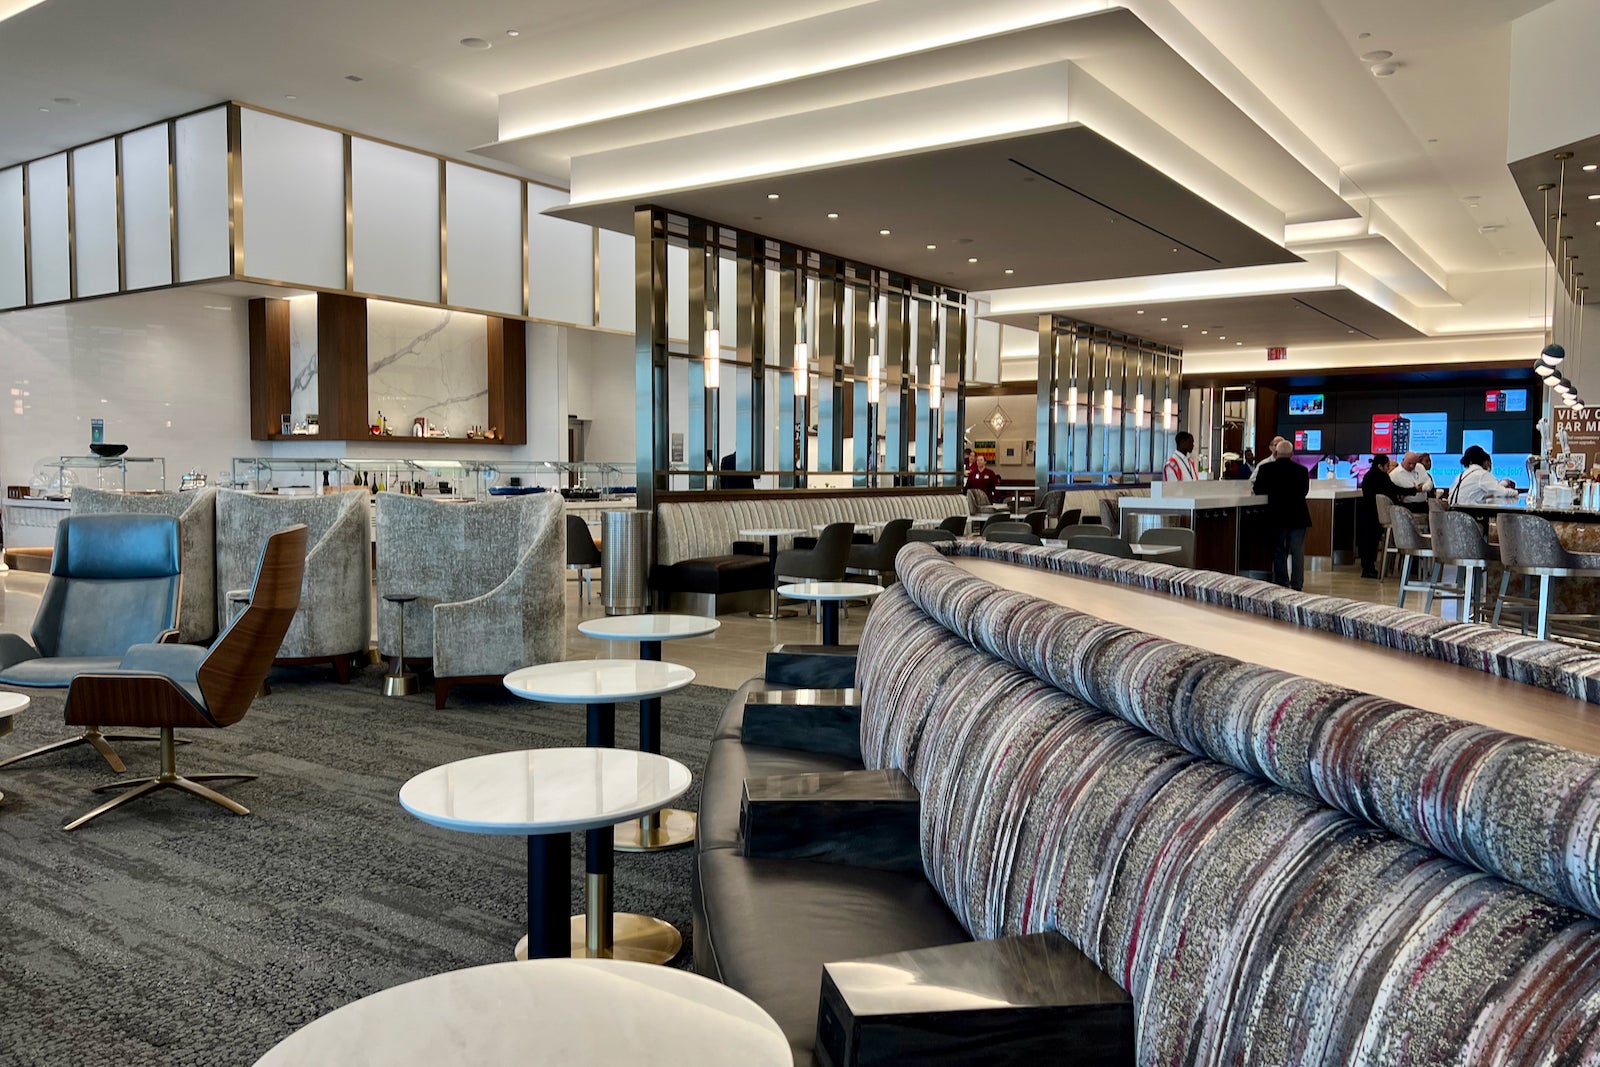 Inside Delta's largestever Sky Club opening in the new LaGuardia